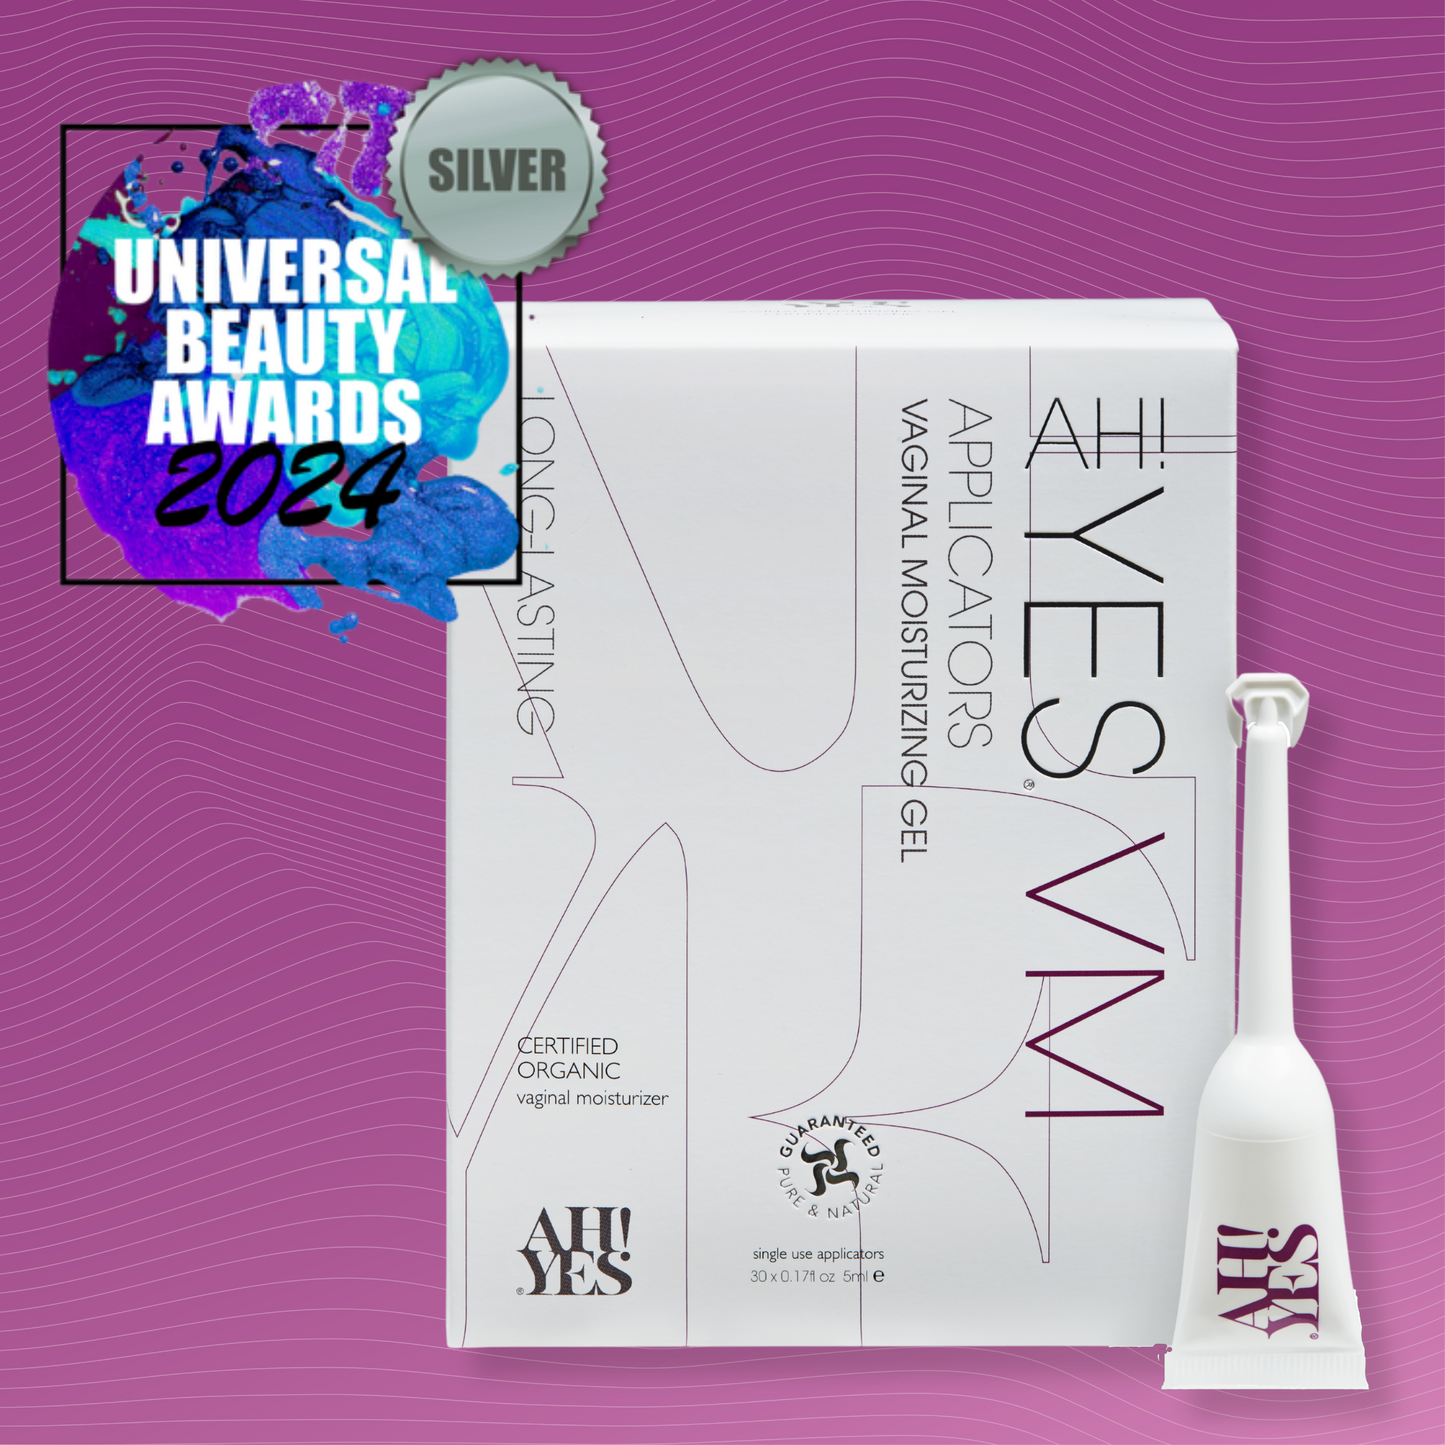 AH! YES VM pH matched vaginal moisturizer 30 apps silver universal beauty award